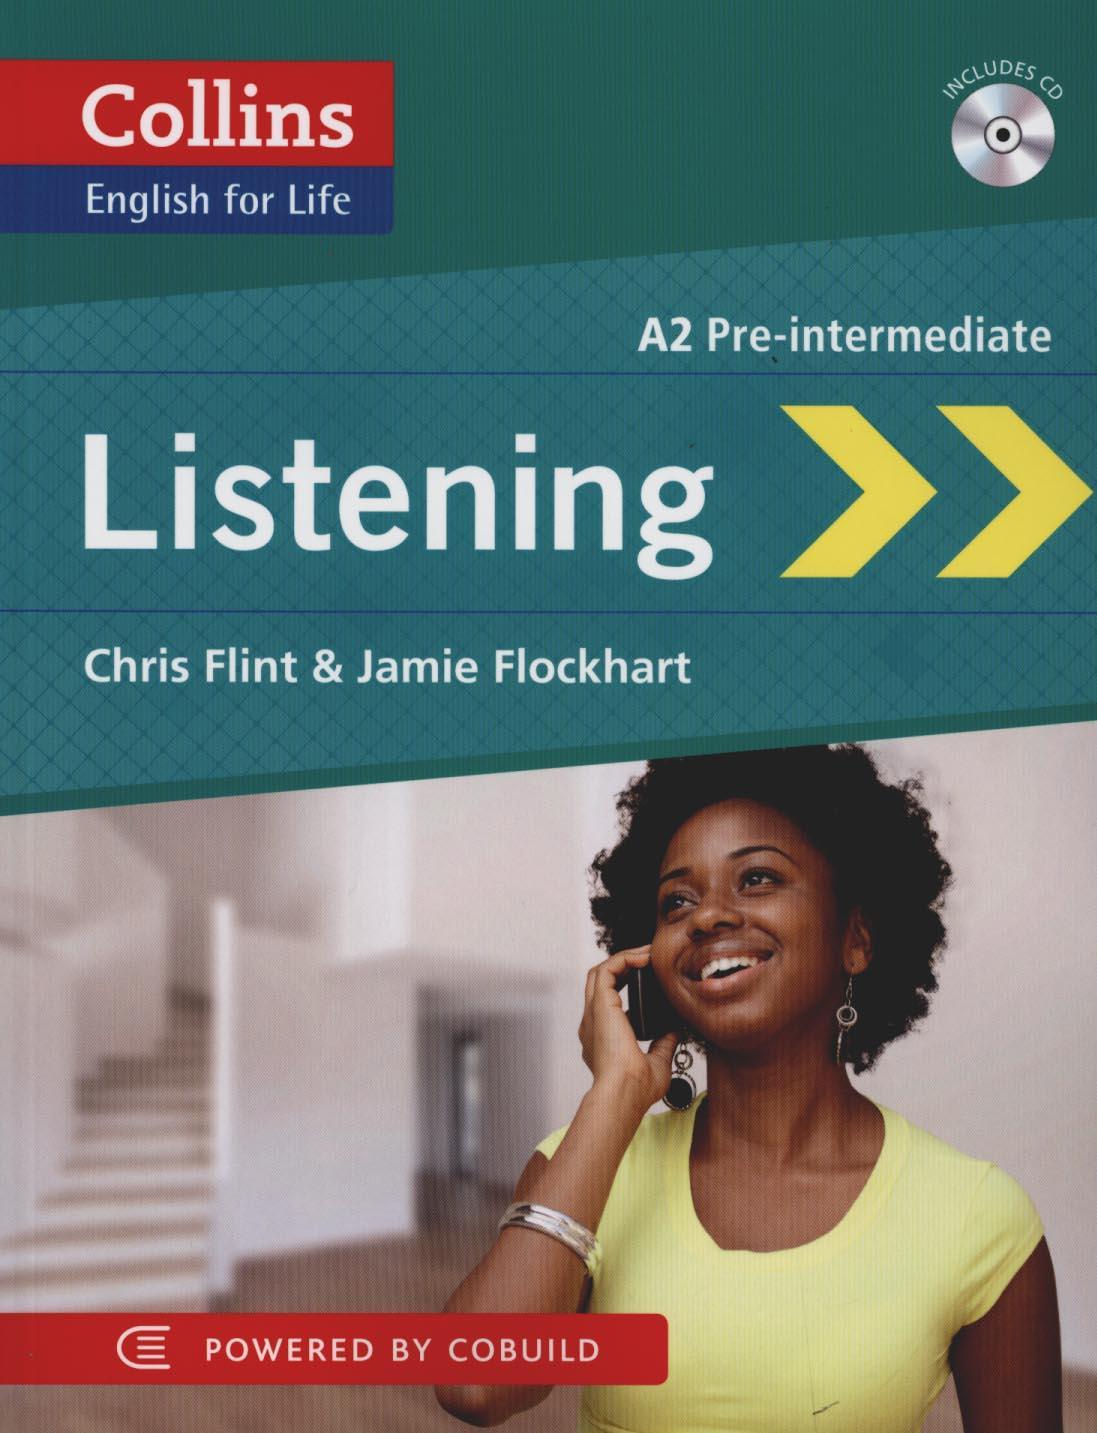 Collins English for Life: Listening A2